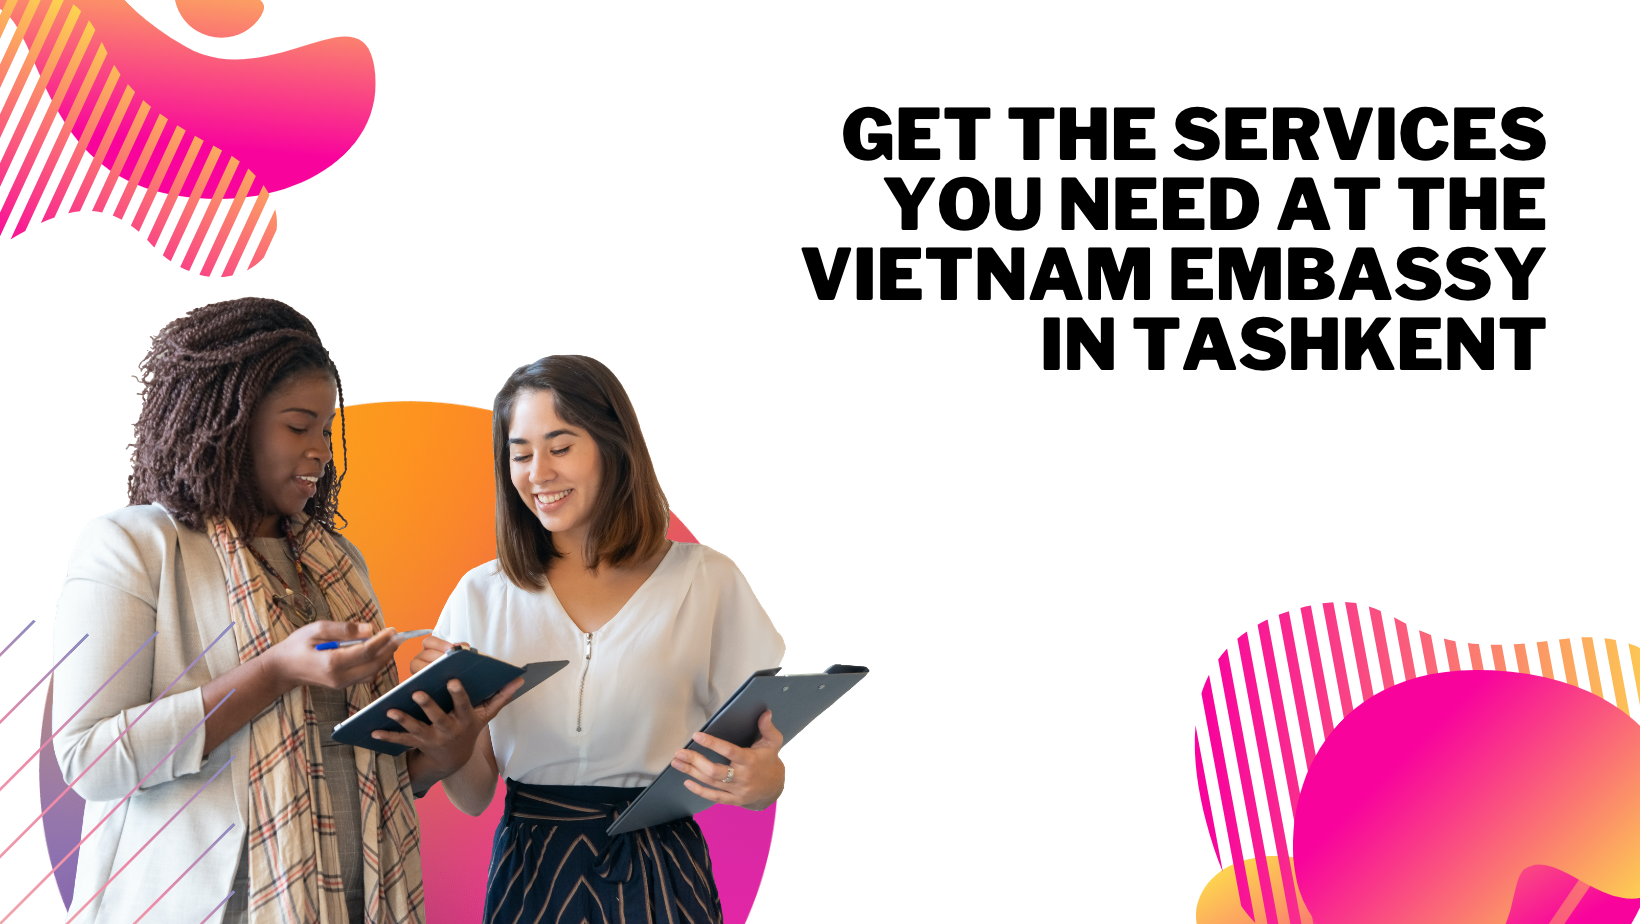 Get the Services You Need at the Vietnam Embassy in Tashkent